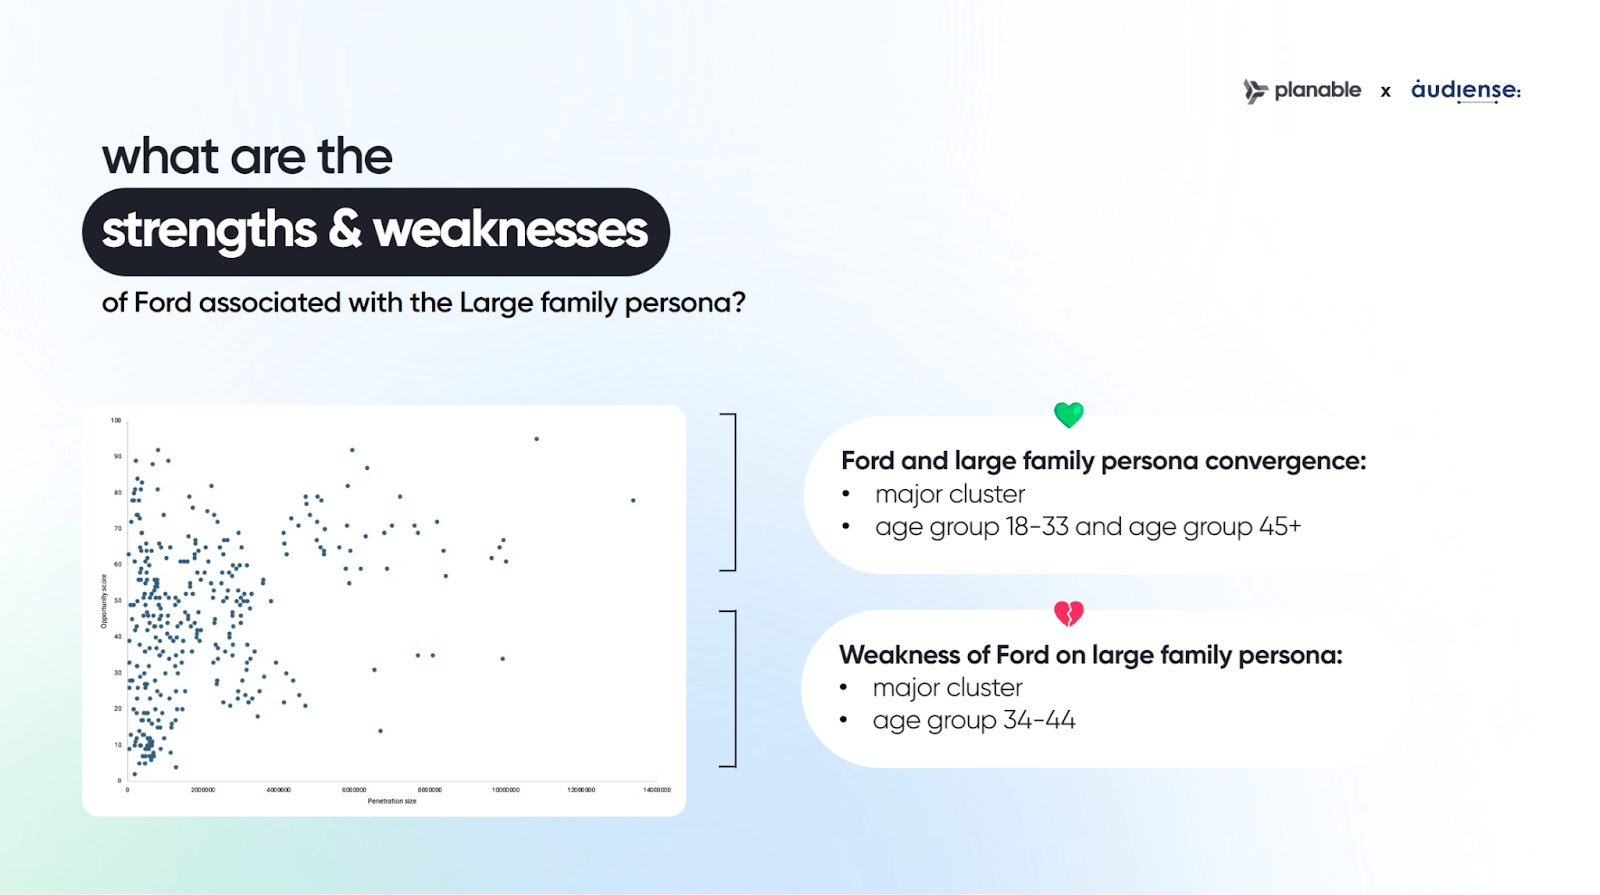 Strengths and weaknesses of Ford's association with large families, highlighting convergence in age groups 18-33 and 45+, and weakness in age group 34-44.